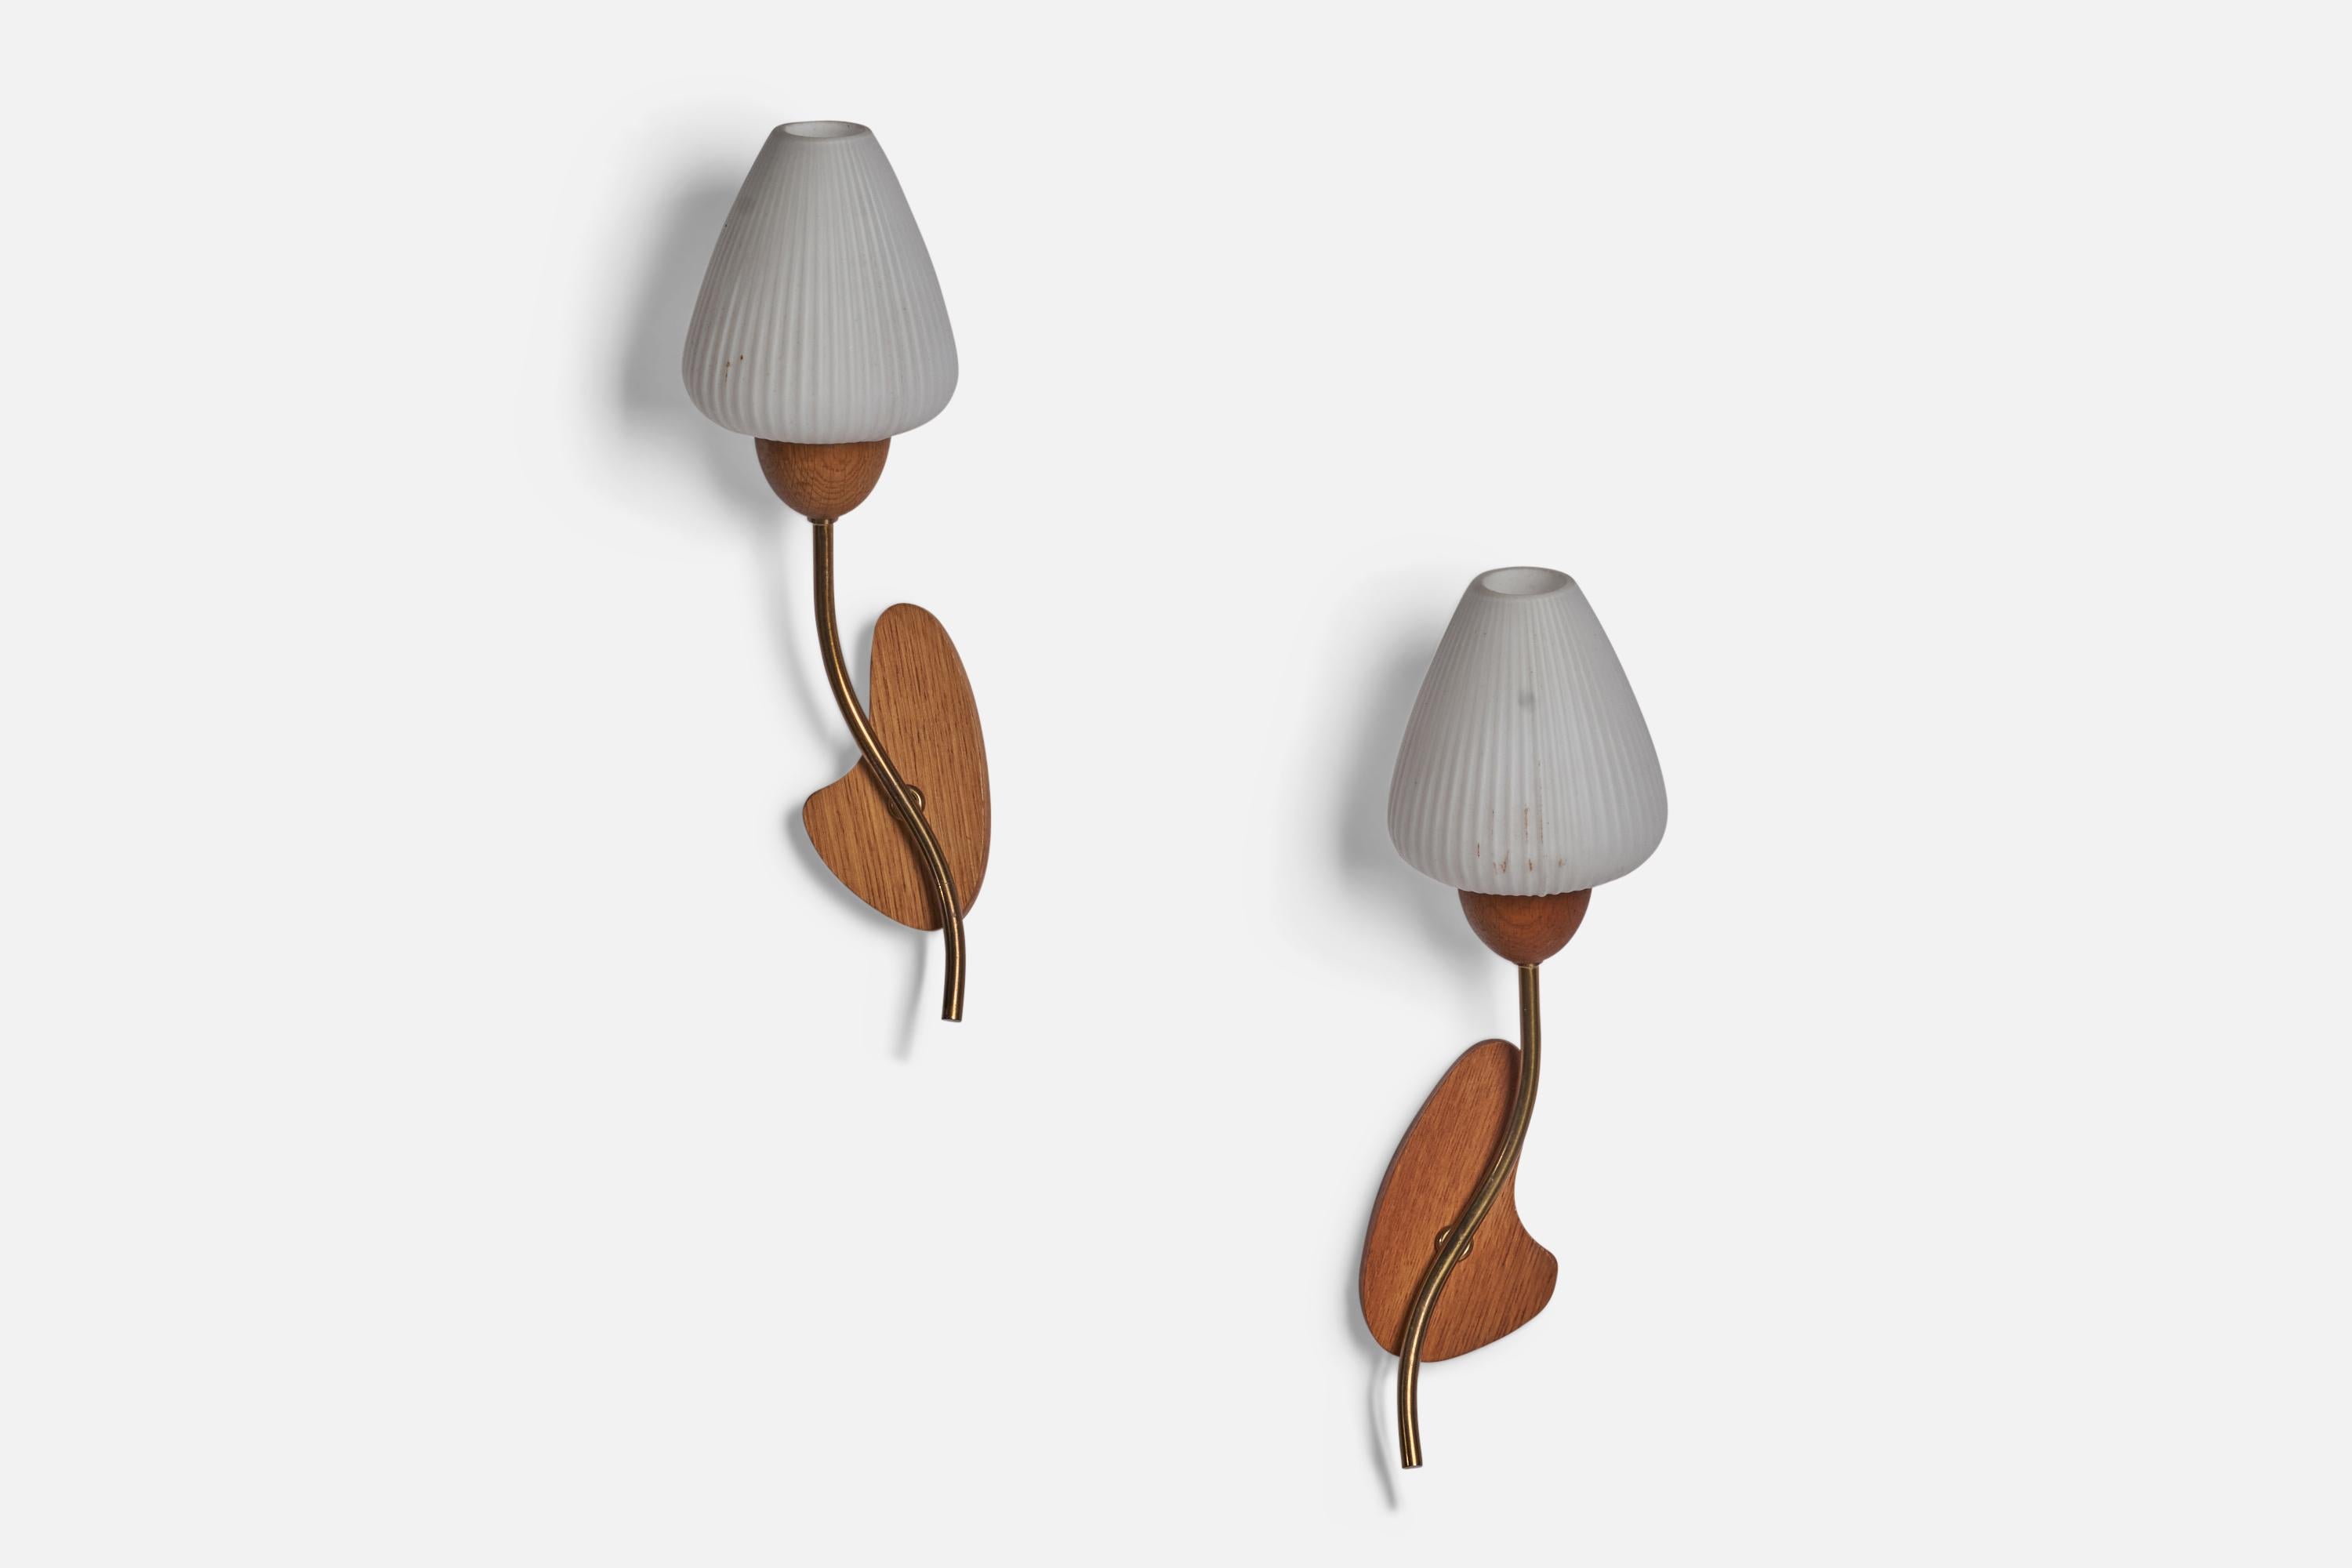 A pair of organic brass, teak and opaline glass wall lights designed and produced in Sweden, c. 1950s.

Overall Dimensions (inches): 13” H x 4.5” W x 4” D
Back Plate Dimensions (inches): 4.75” H x 2.6” W x 0.75” D
Bulb Specifications: E-14